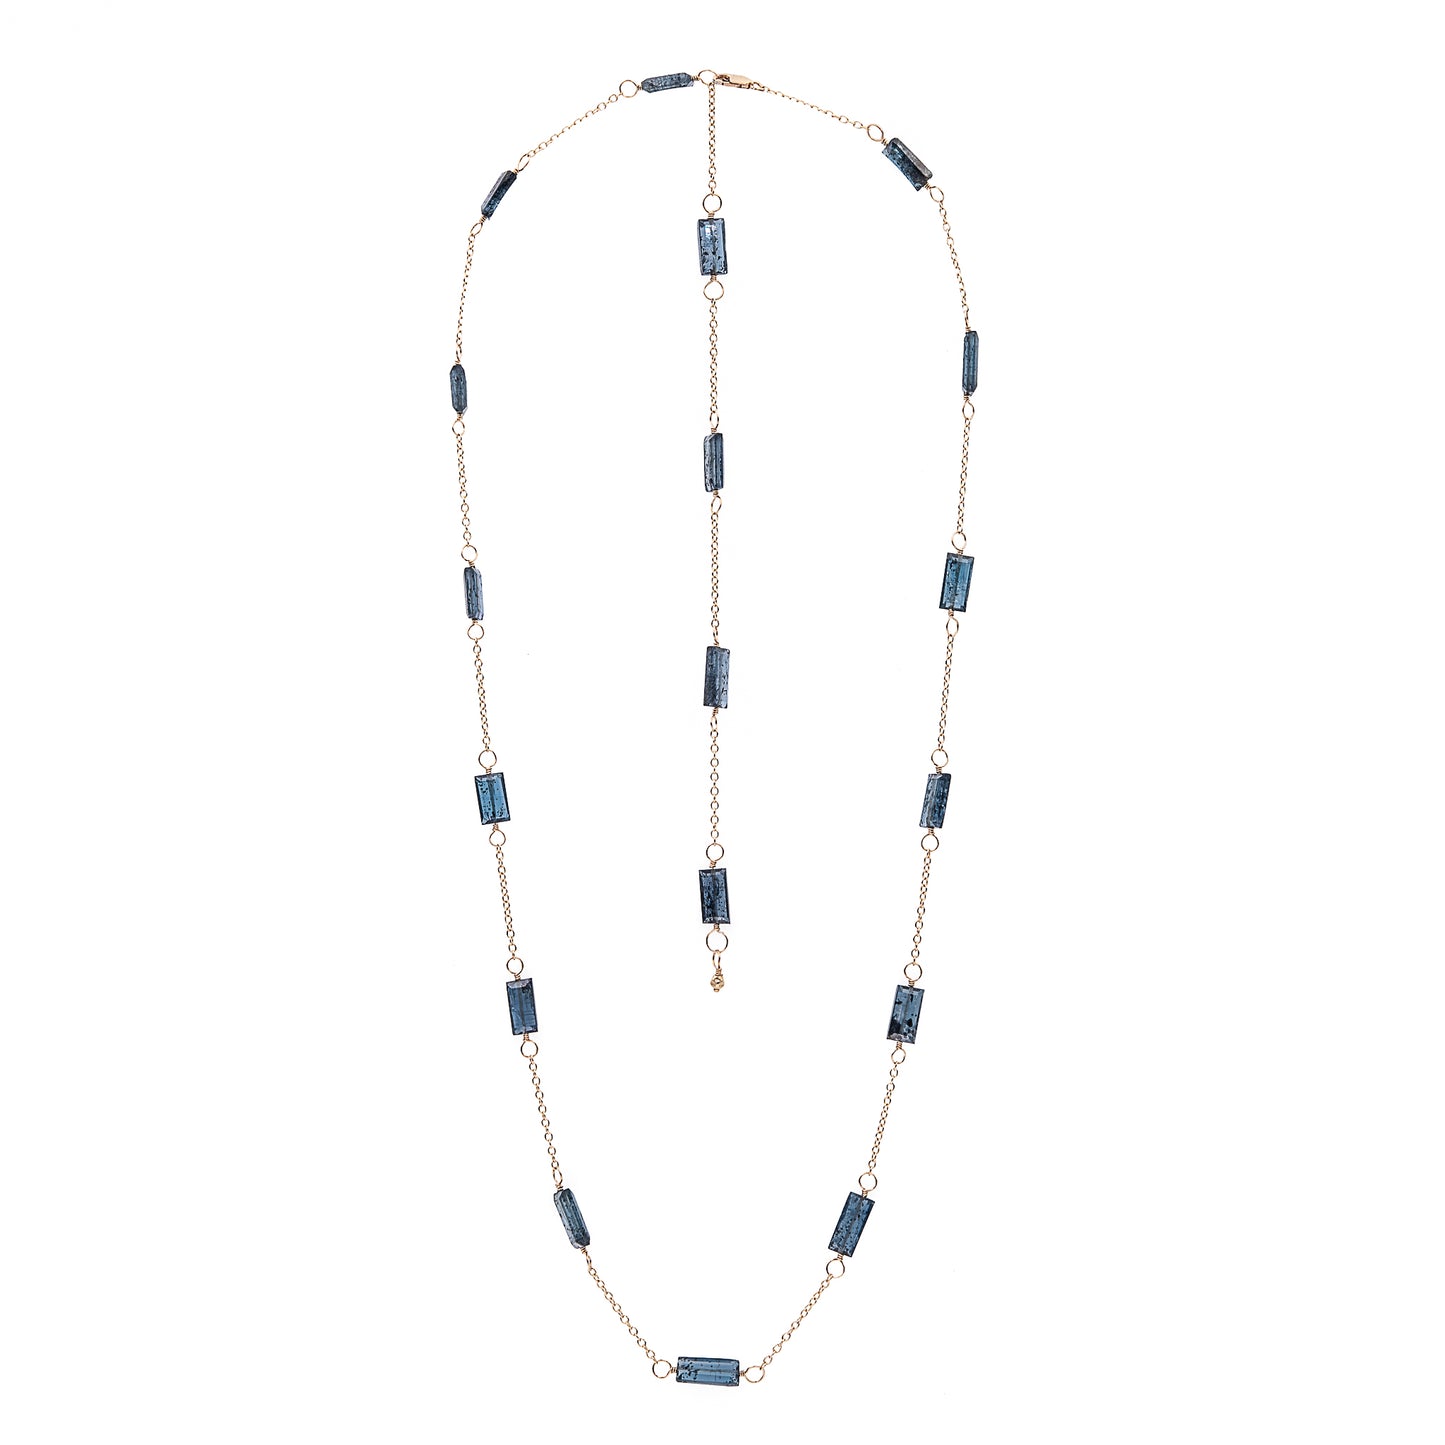 Zurina Ketola long moss aquamarine necklace in 14K gold fill shown as a shorter length with long chain and gemstone detail at clasp on white background.